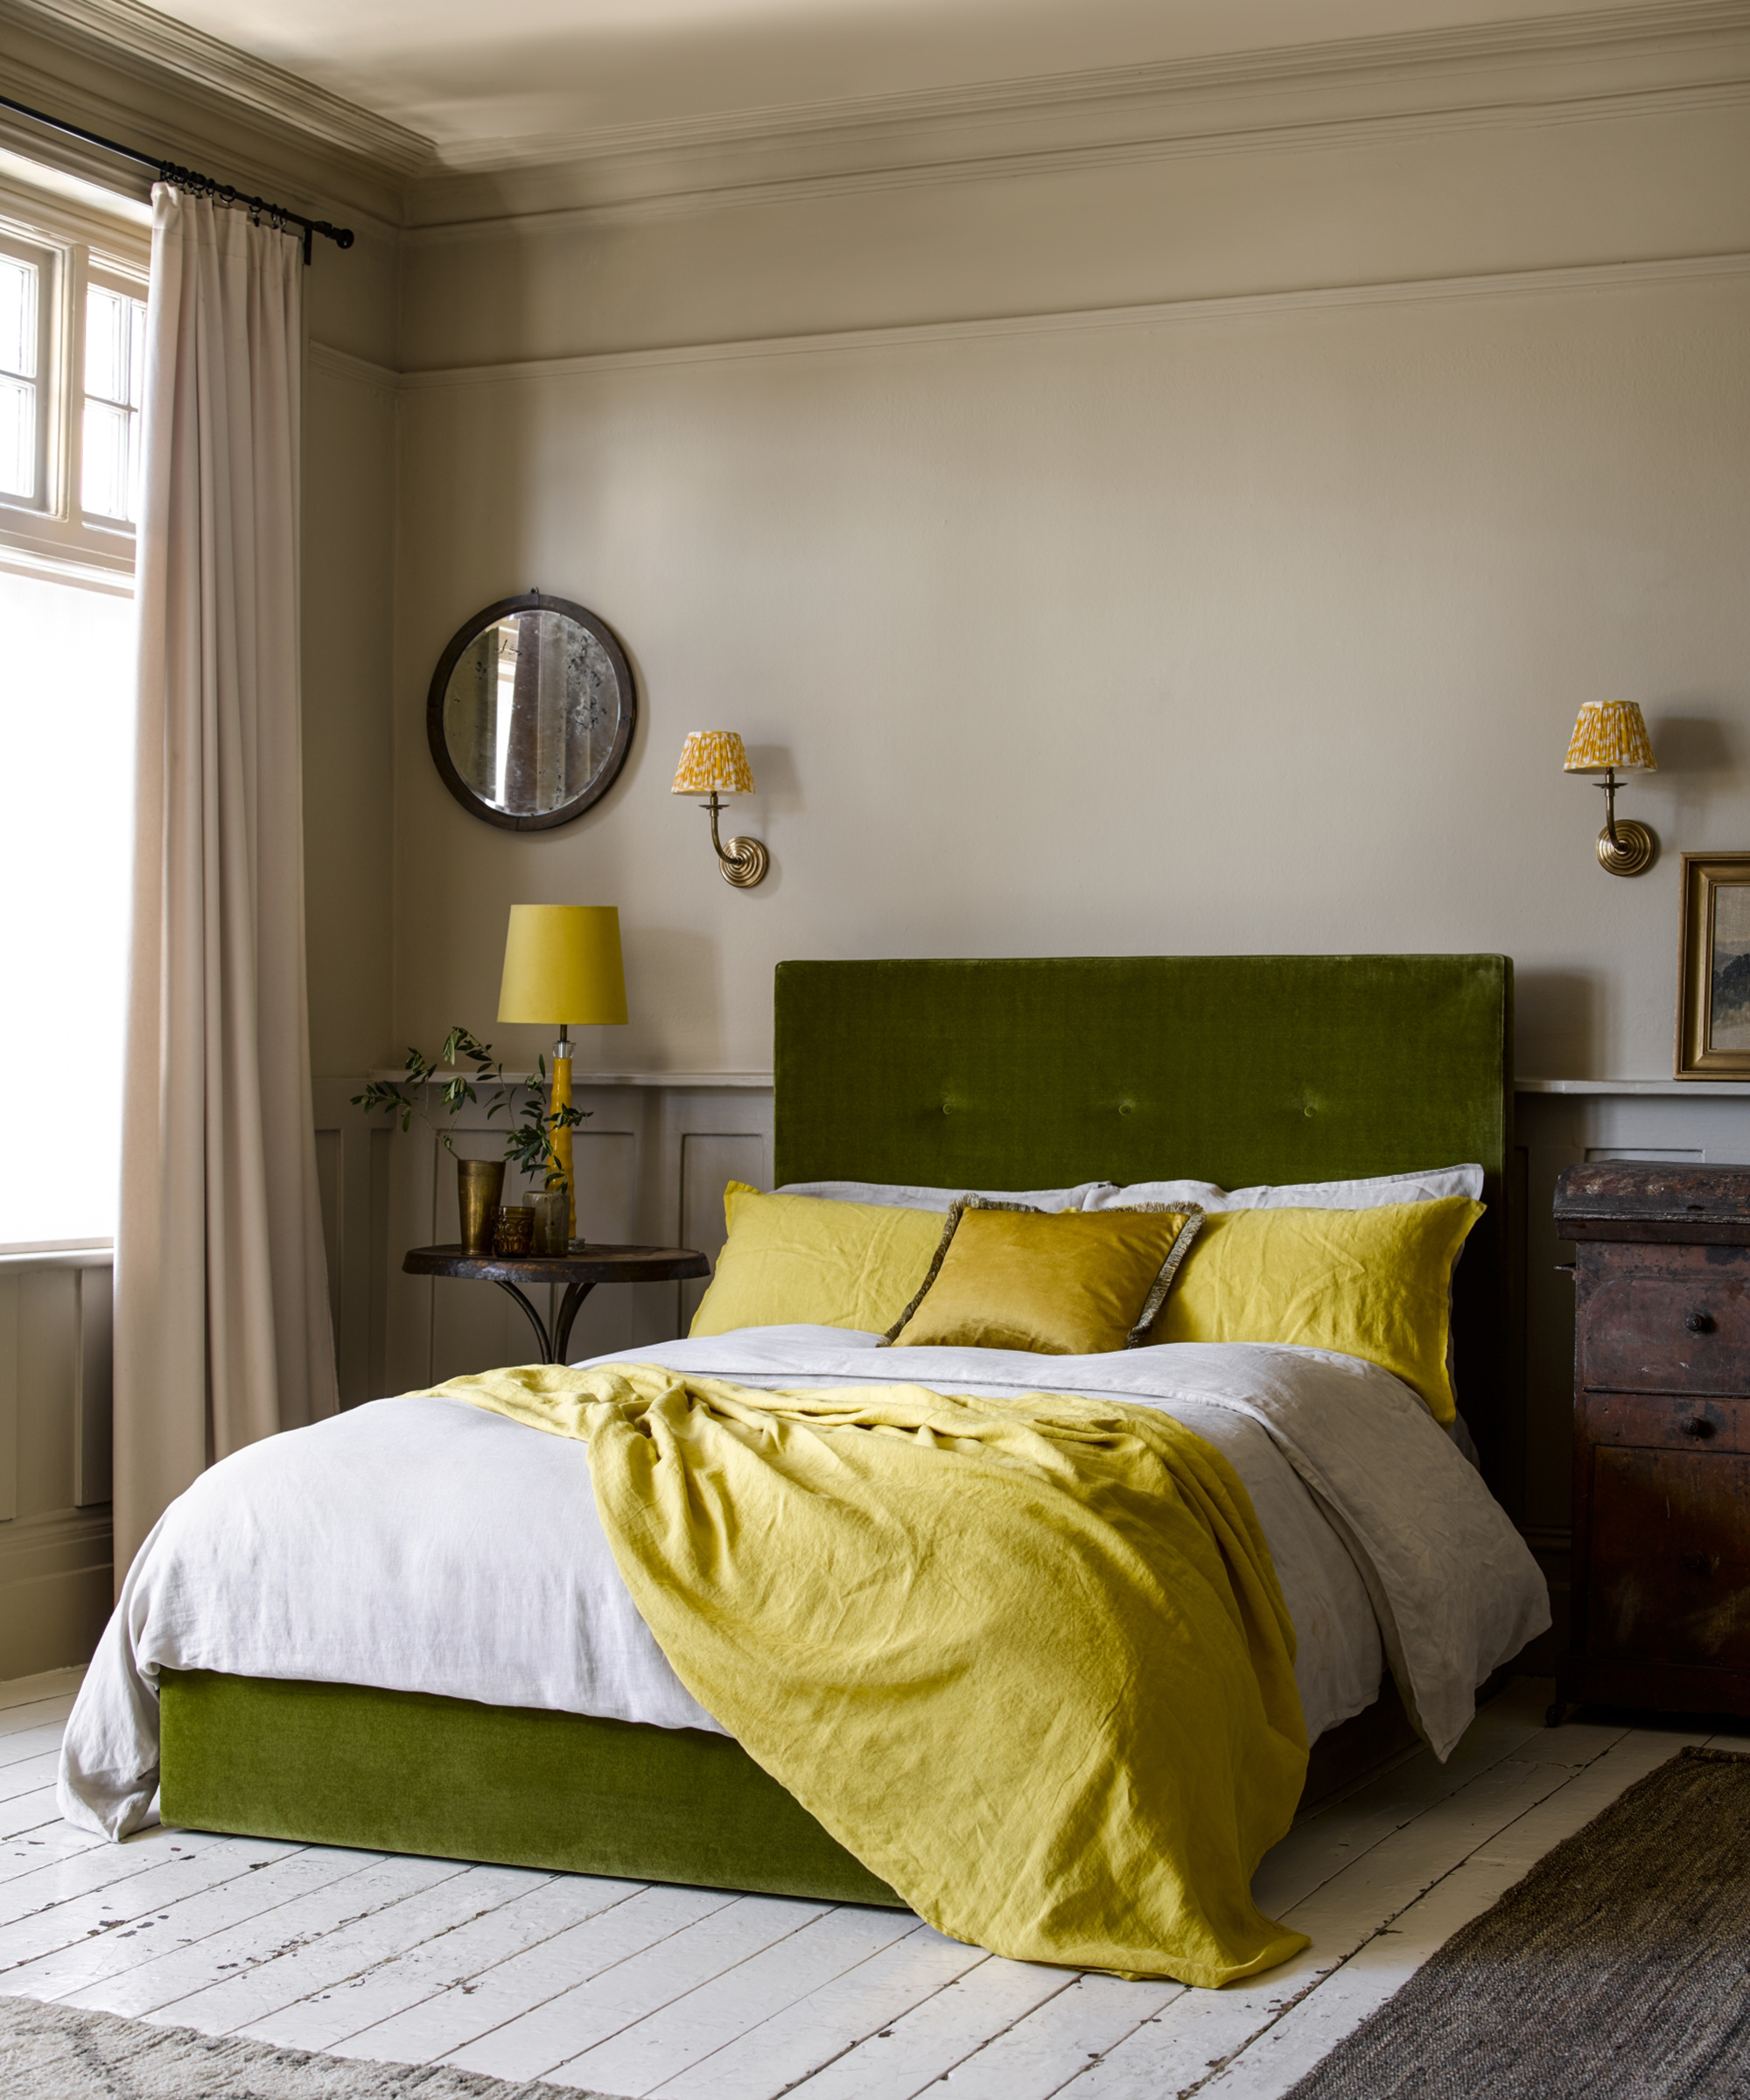 A green velvet bed with yellow and white bedding in front of two wall lamps